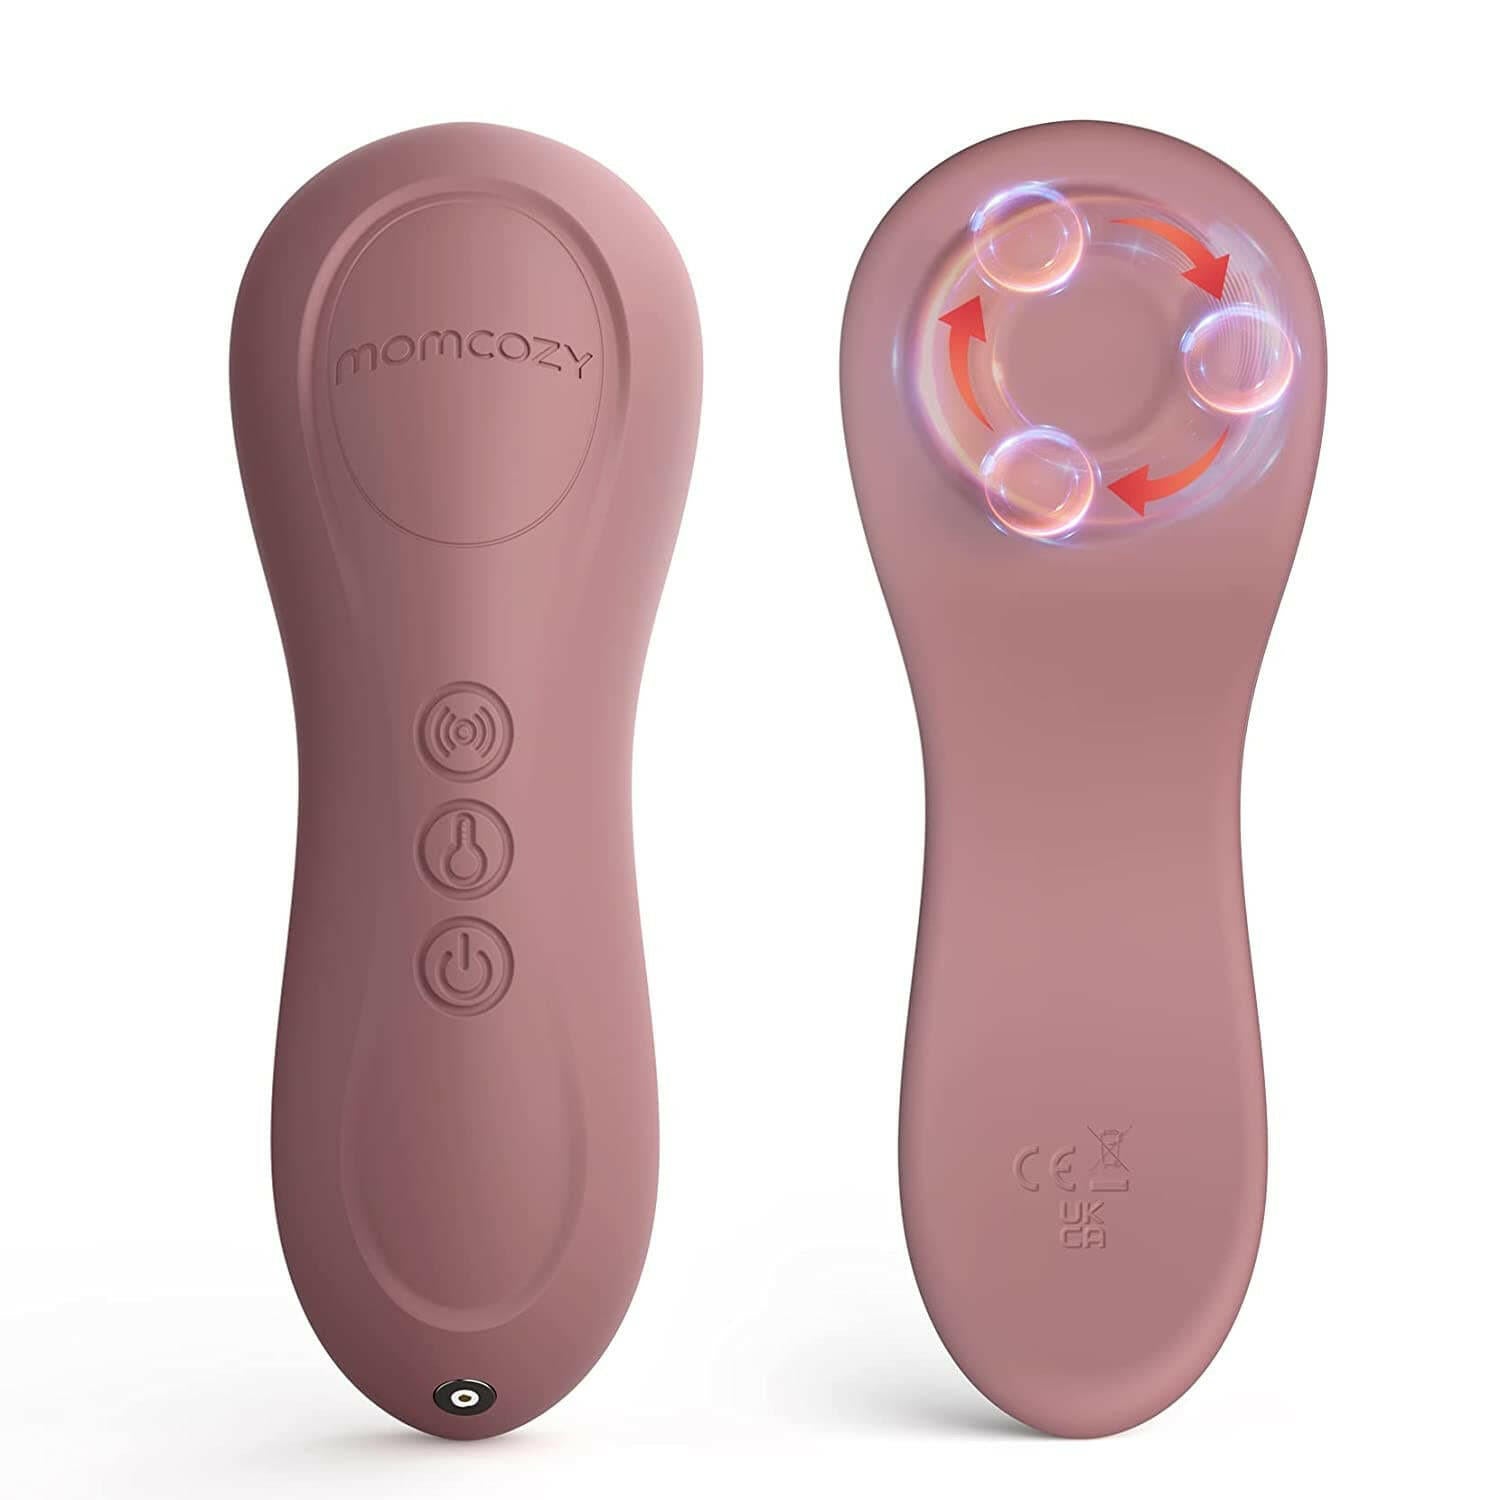 Momcozy Kneading Lactation Massager with Heat, 3-in-1 Real-Like Massage for Relieve Clogged Ducts.